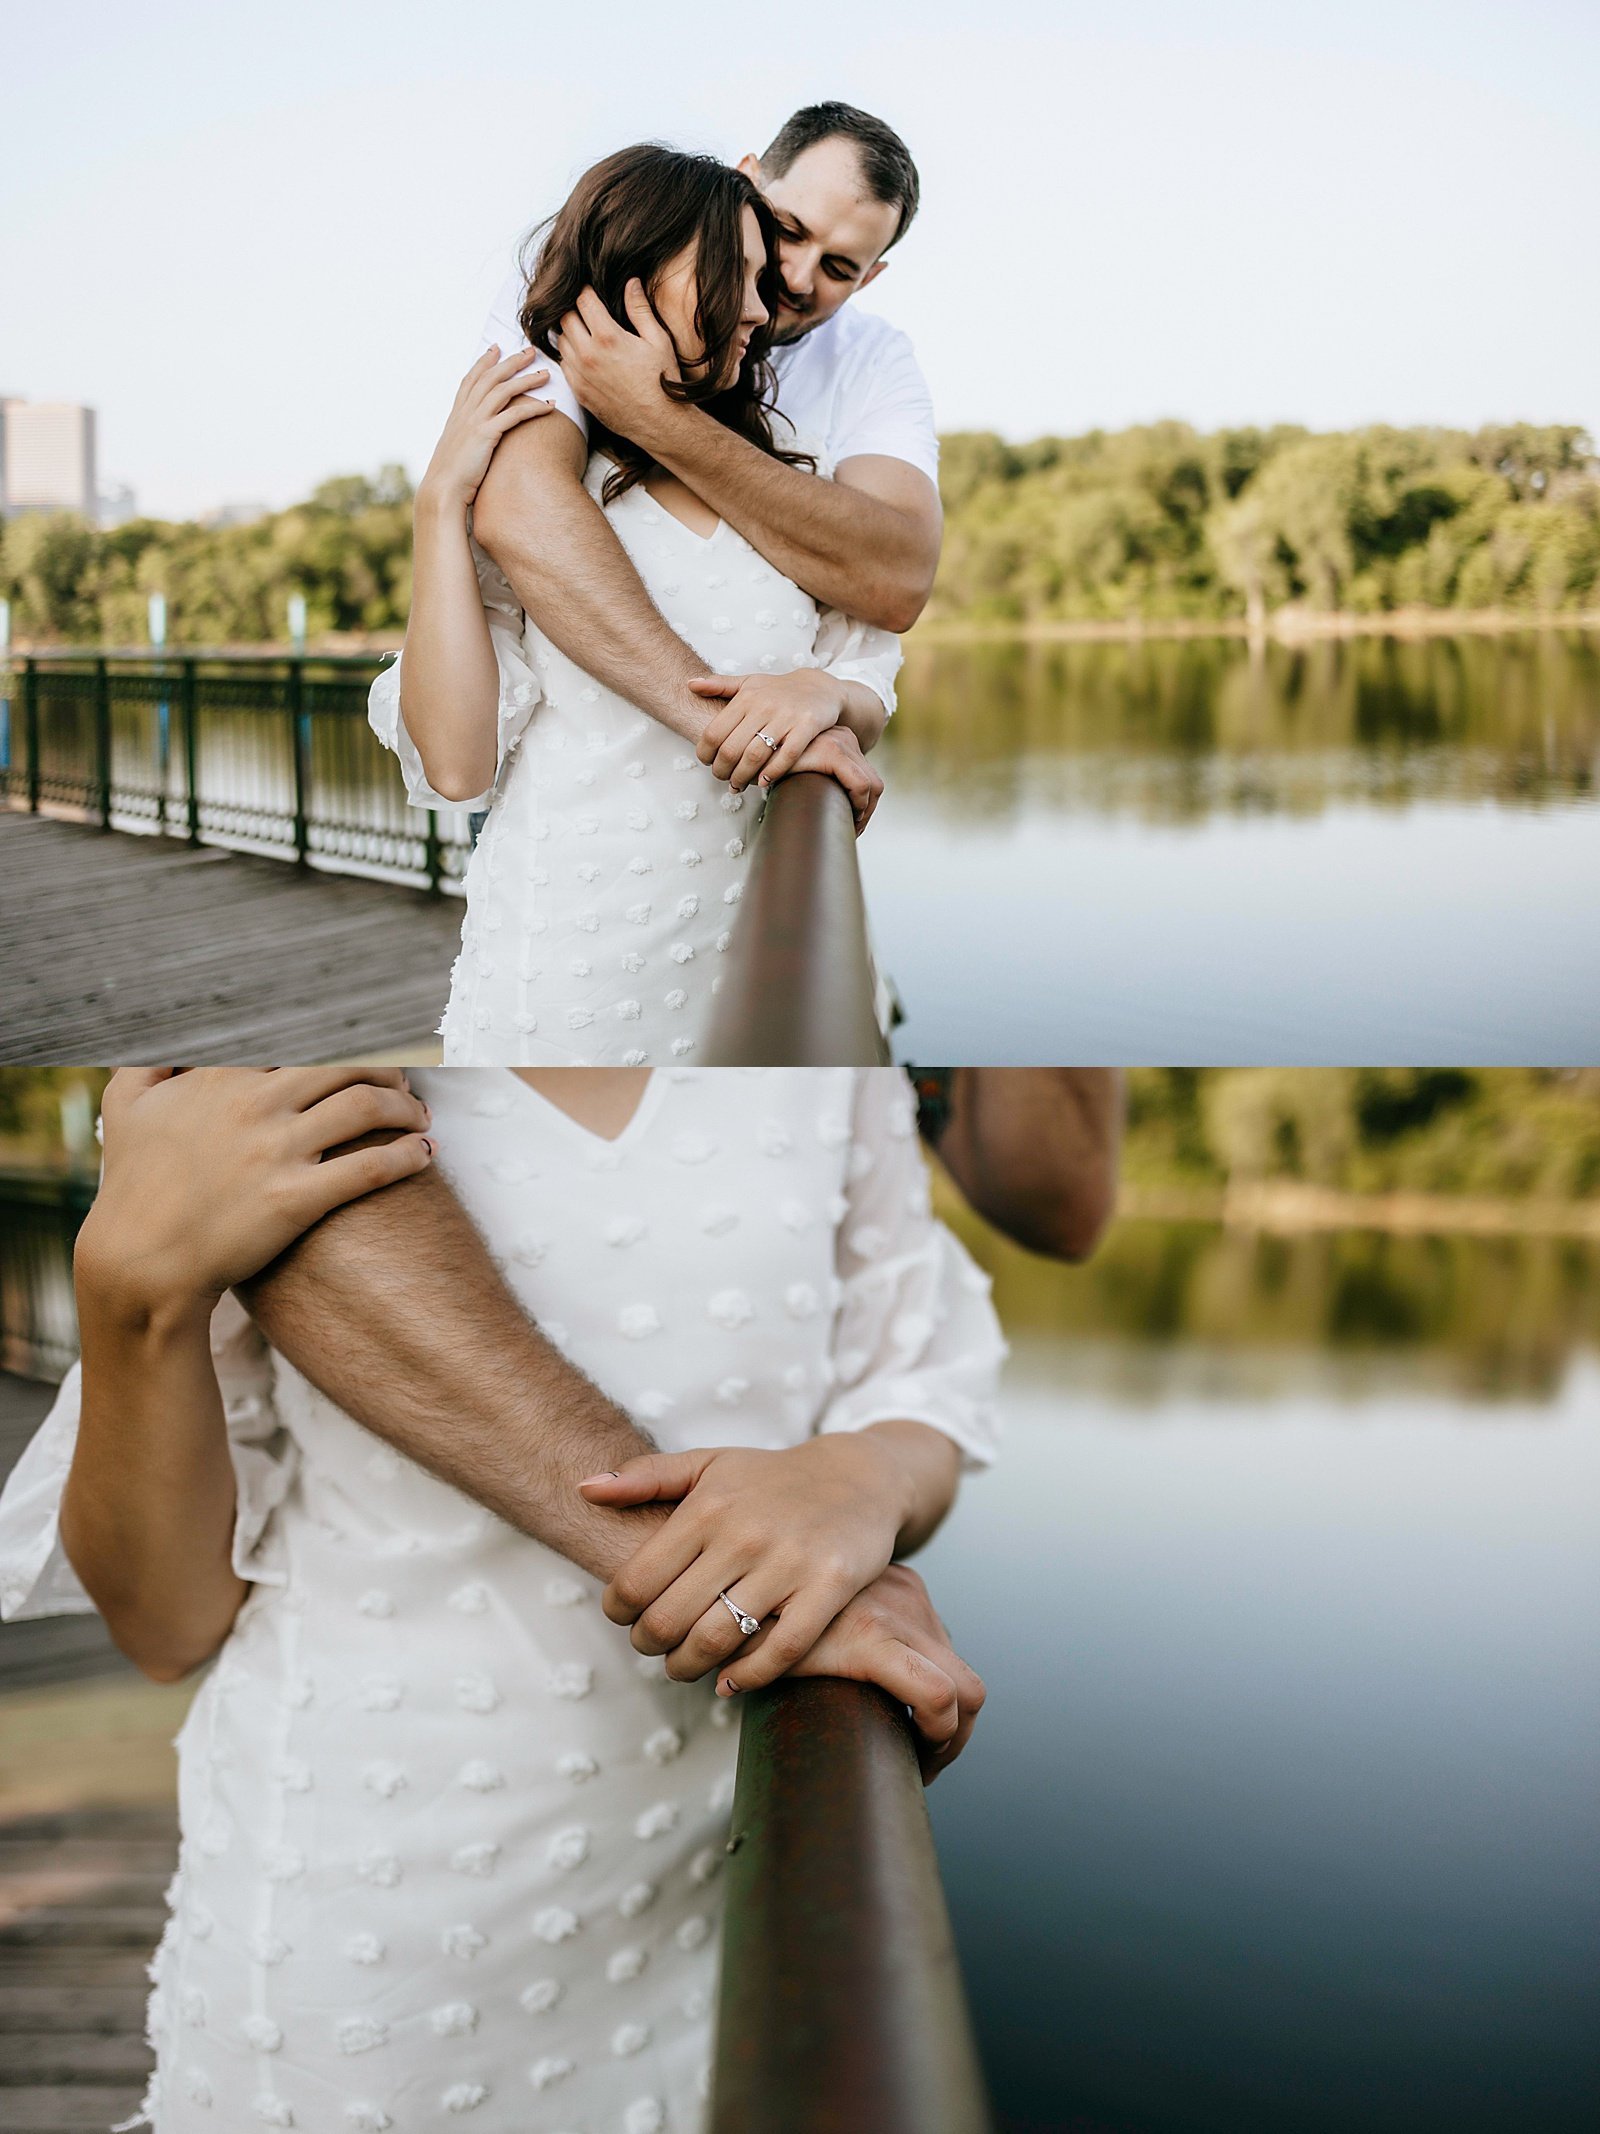  Man and woman all wrapped up in an embrace at sunrise for a photo shoot. 